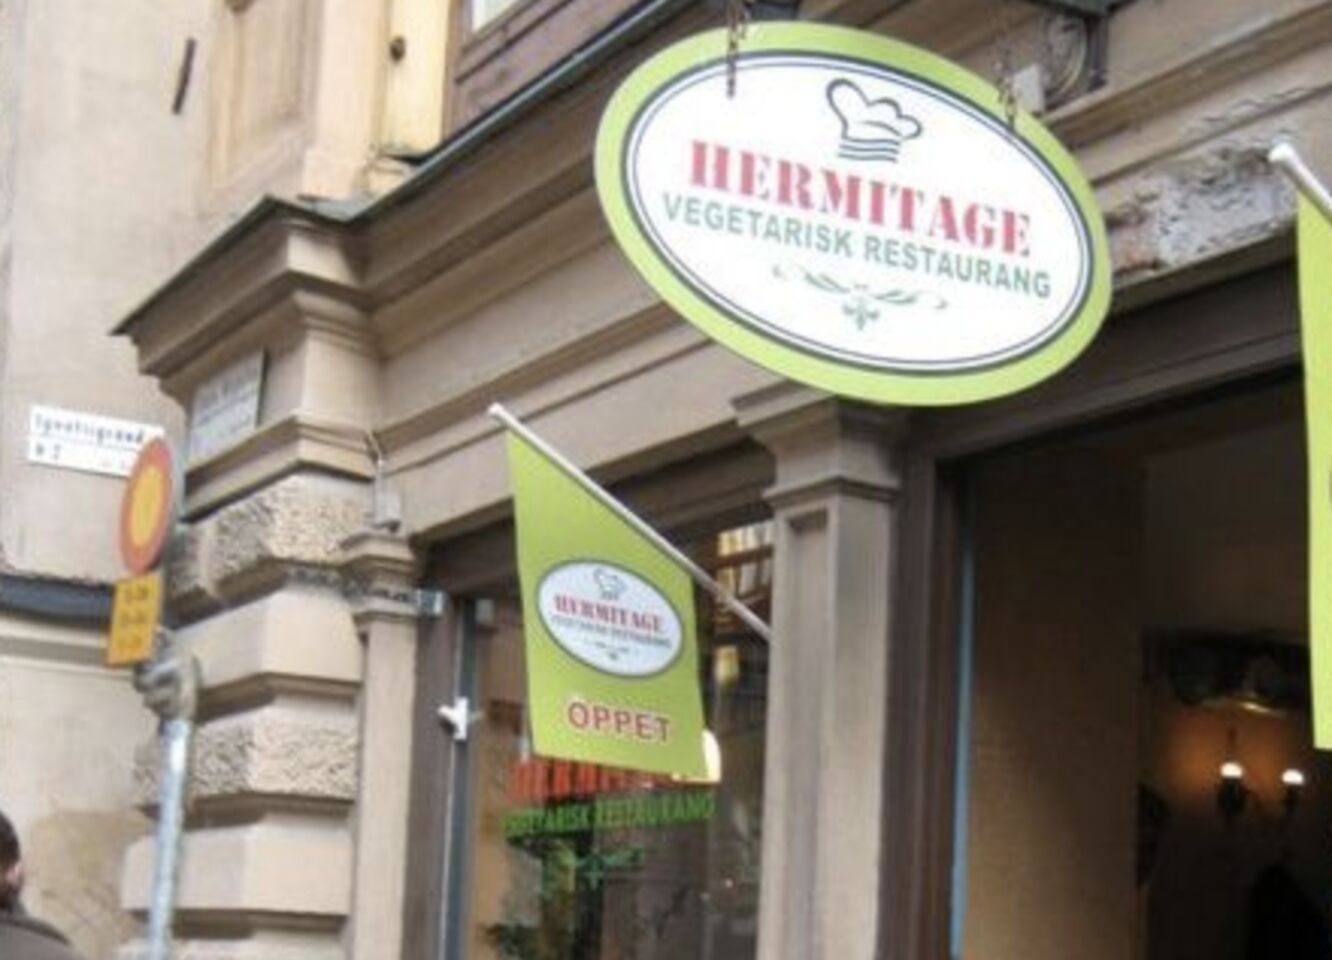 A photo of Hermitage